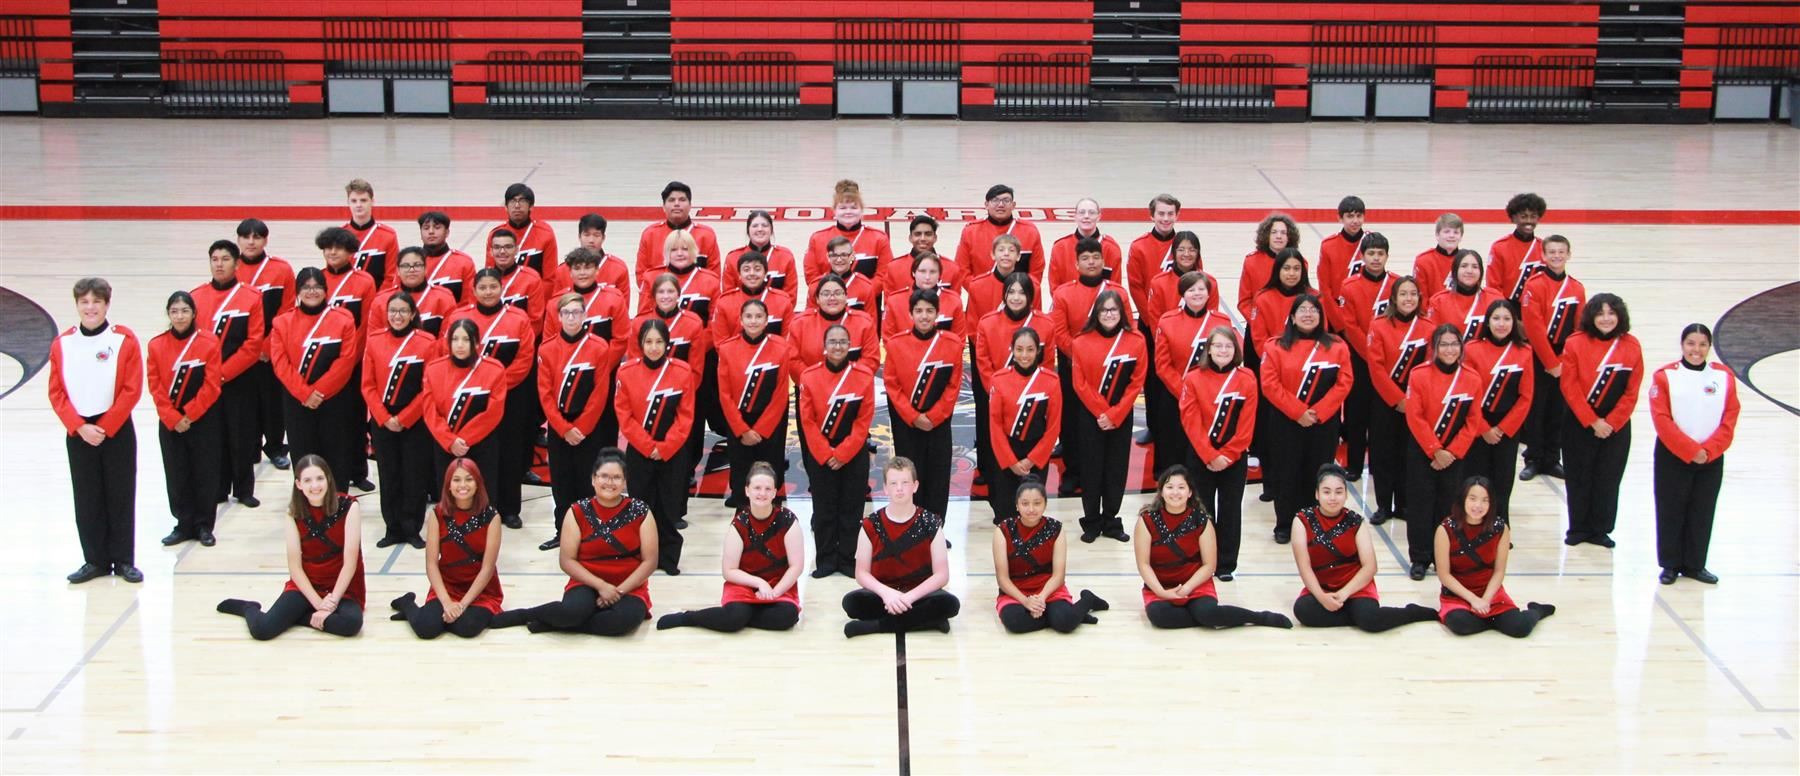 group picture of redcoat band members